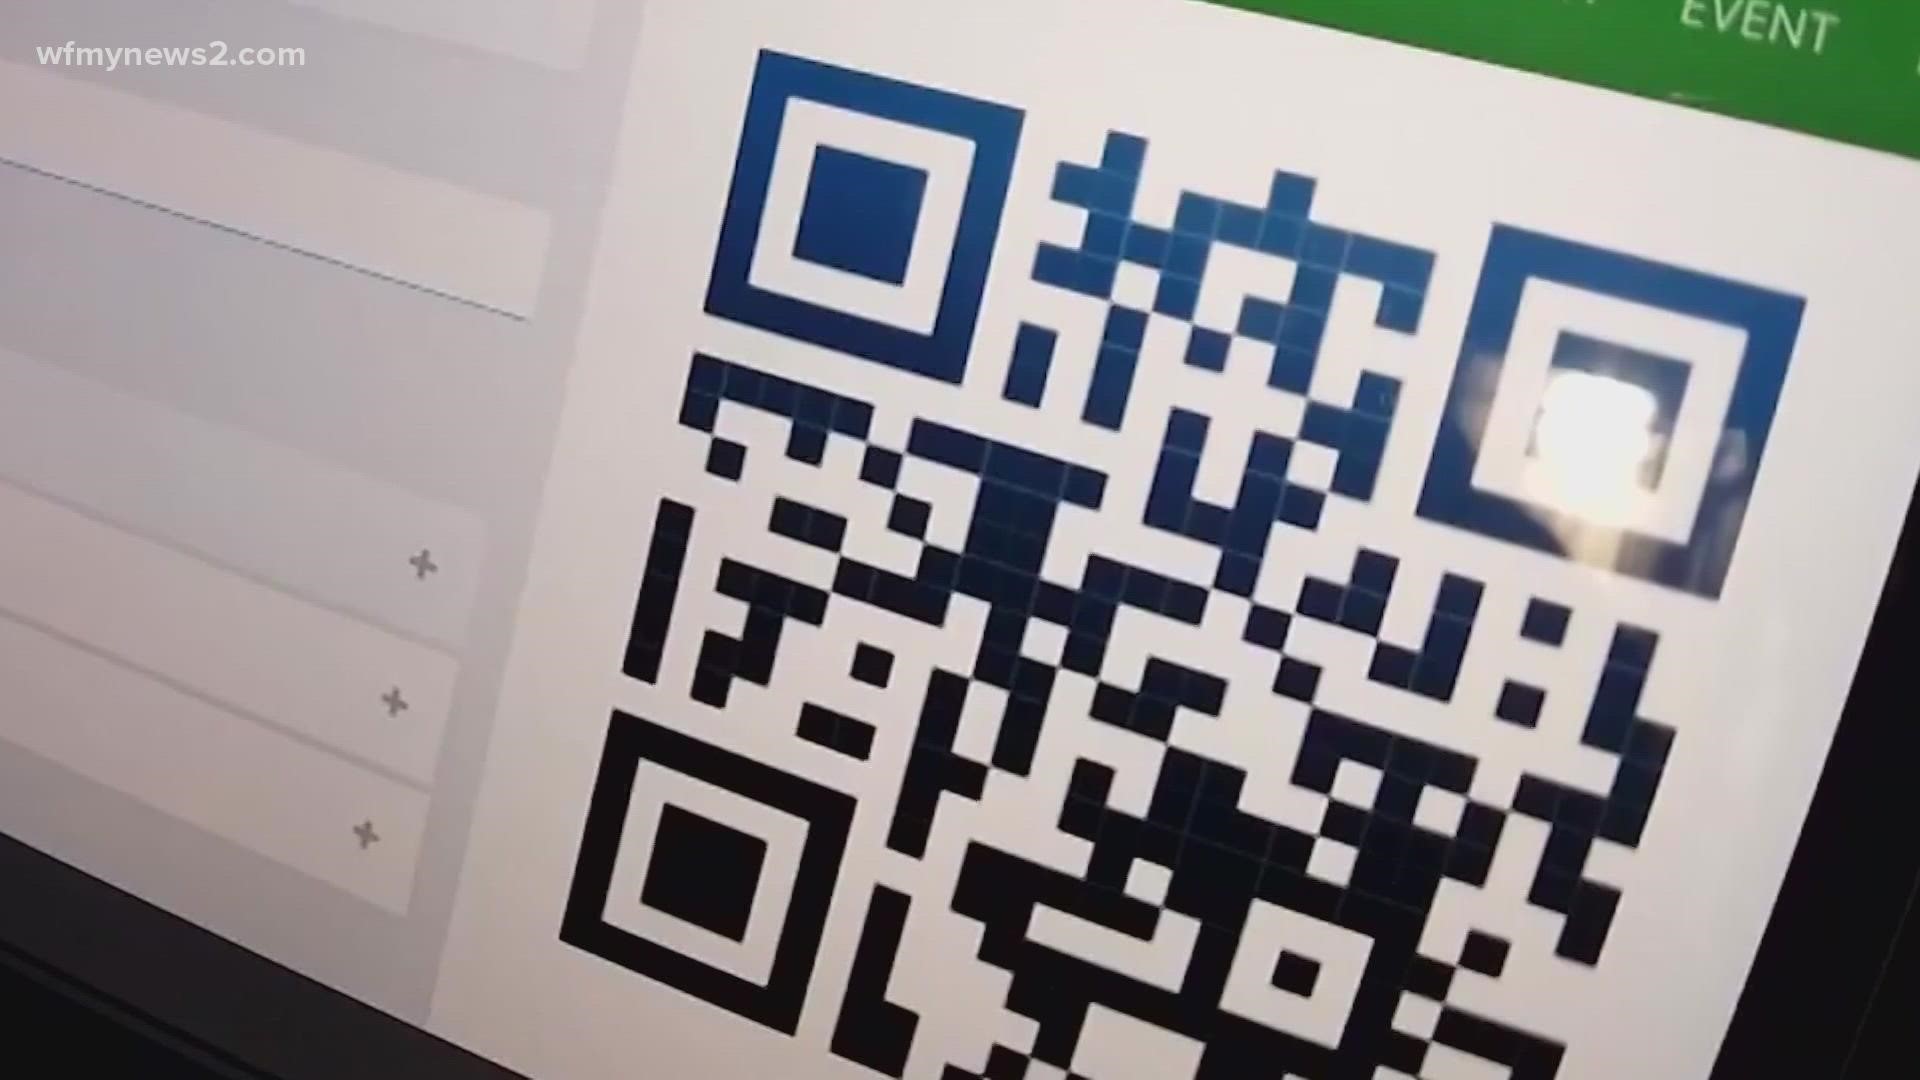 Security experts say you should think twice before scanning QR codes with your smart device.